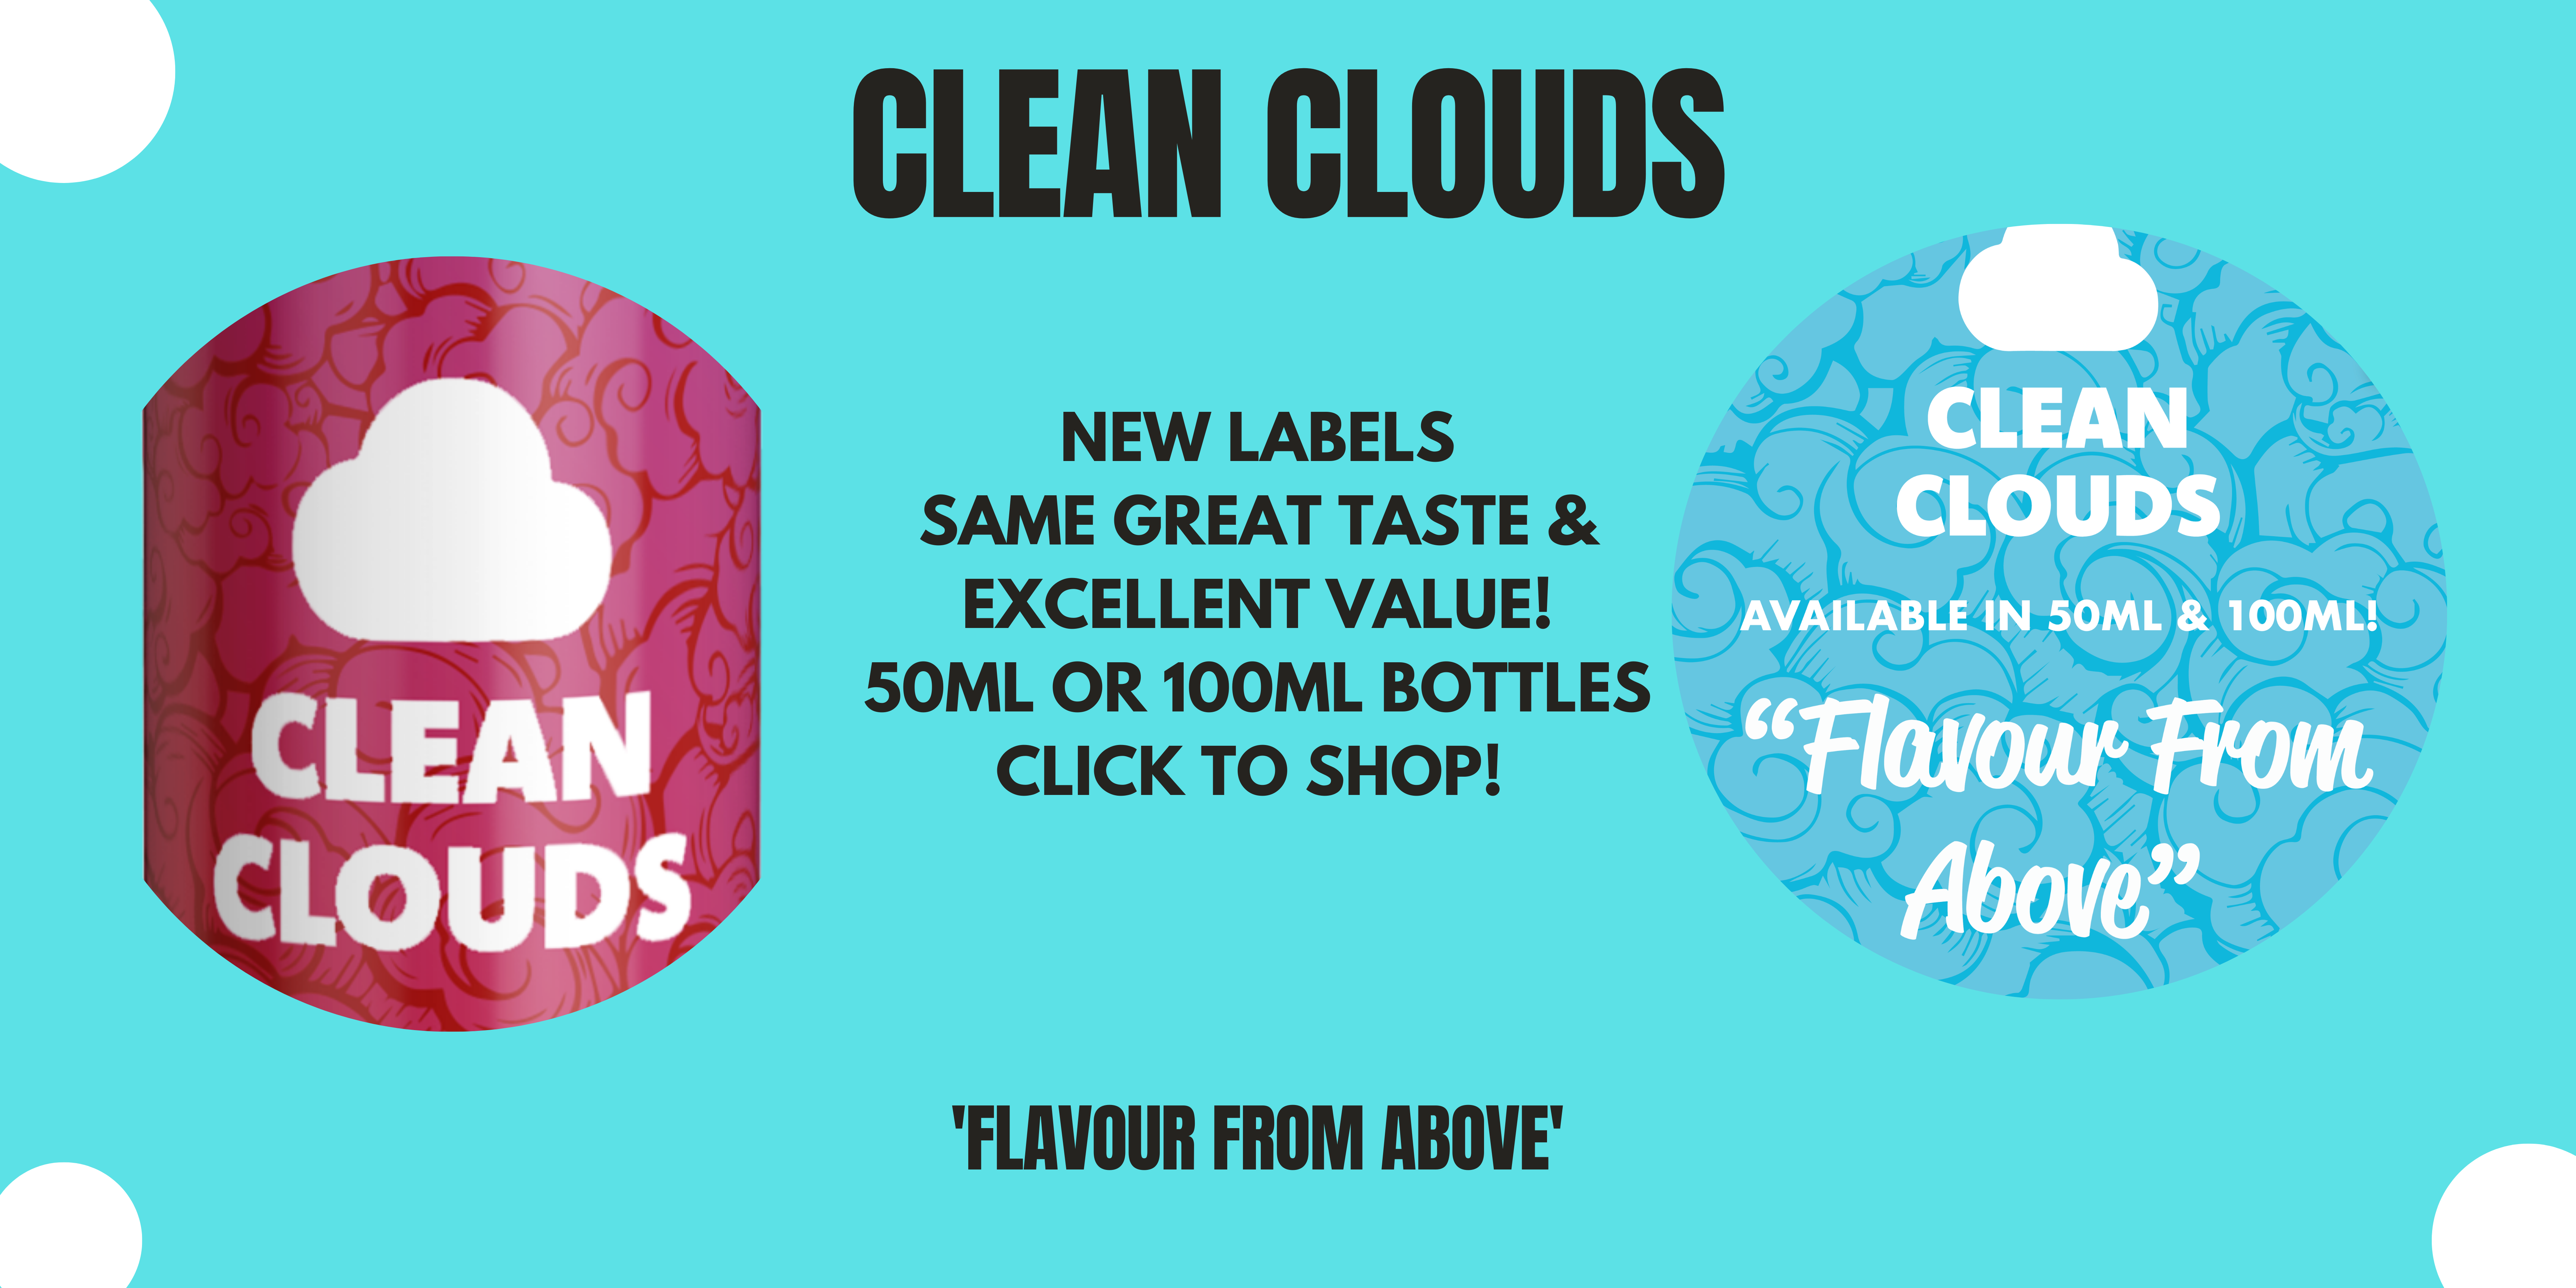 New Clean Clouds Labels Banner